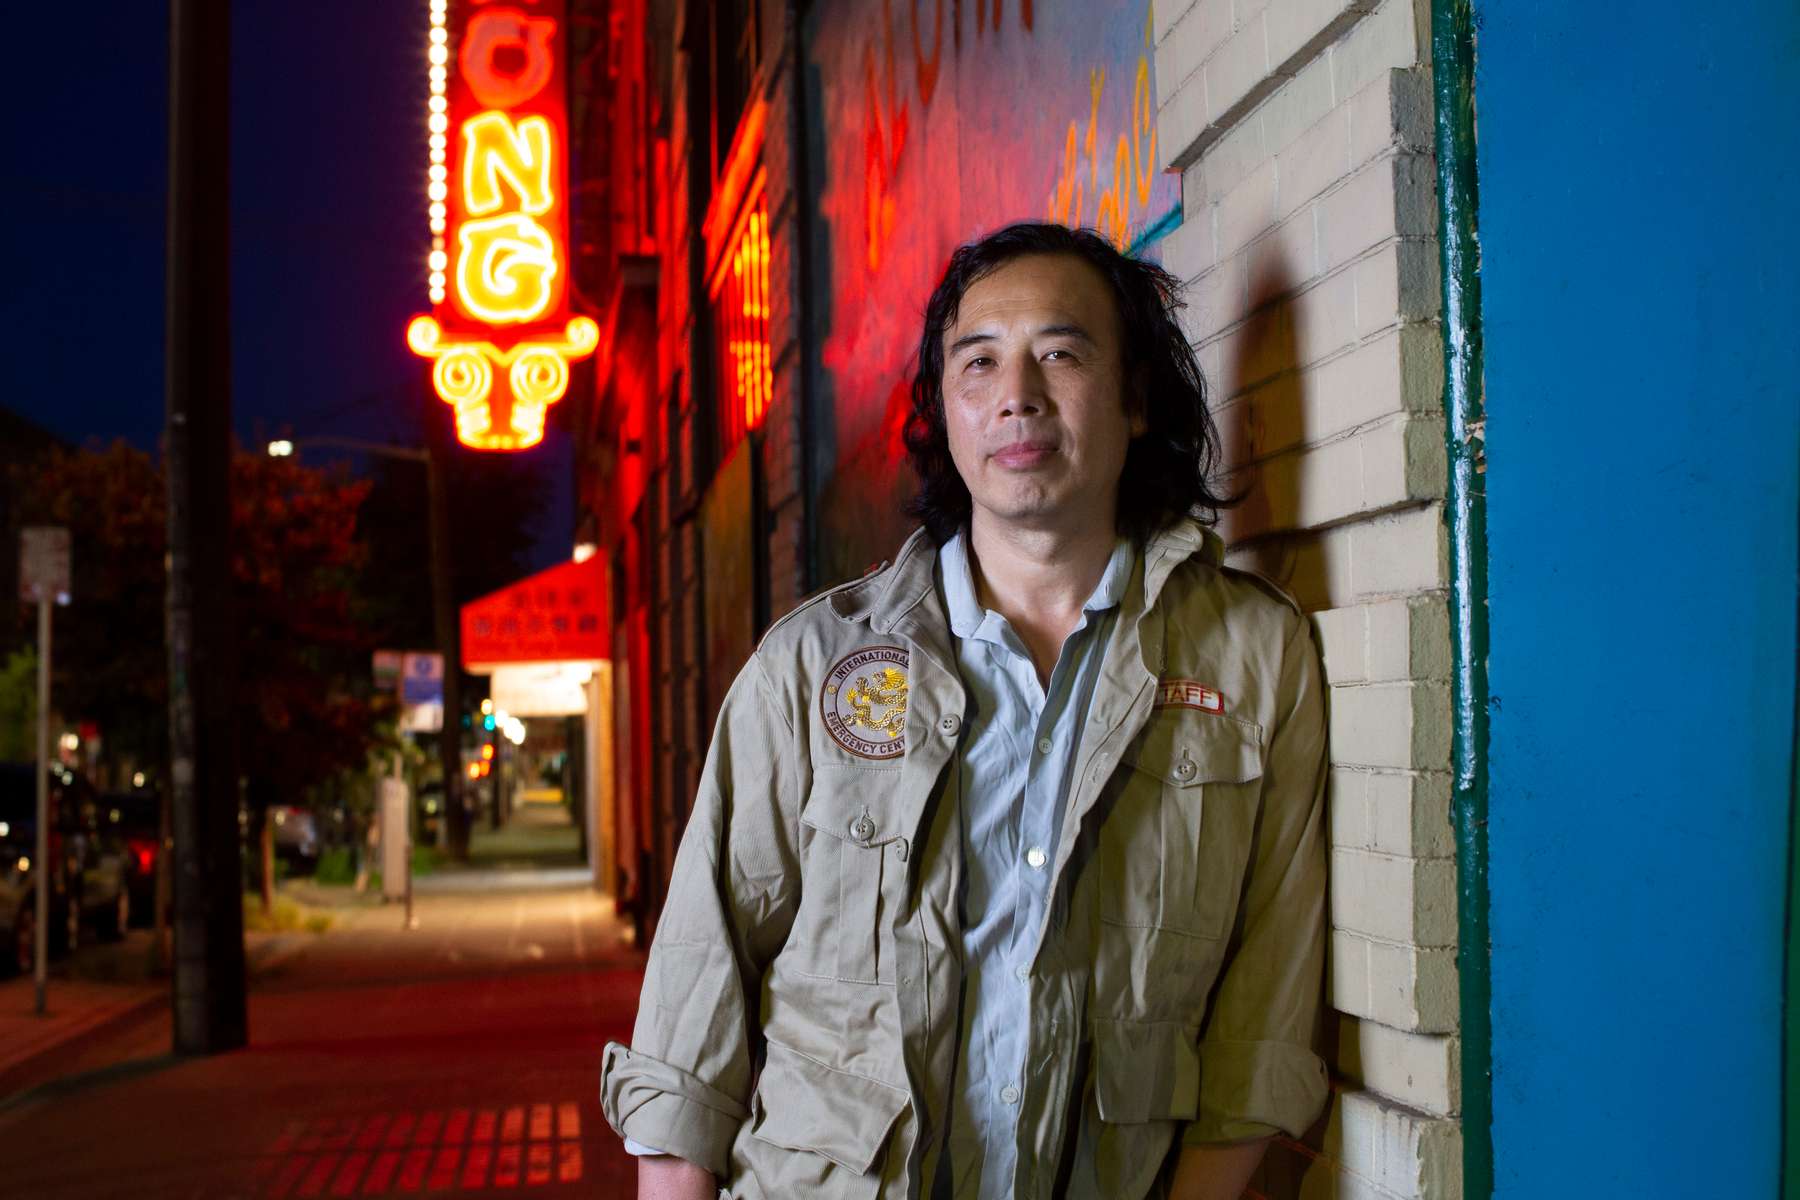 Johnny Chan photographed in the Chinatown–International District in Seattle, Washington on July 15, 2020. Behind him is a photo of Donnie Chin on their bordered up storefront. Chan was one of “Donnie’s Kids” when he grew up in the neighborhood in the 80’s and spent a lot time and late nights working with Donnie to protect the neighborhood. Donnie Chin, director of the International District Emergency Center (IDEC) was murdered on July 23, 2015. The murderer was never found. (Photo by Karen Ducey) (Photo by Karen Ducey)